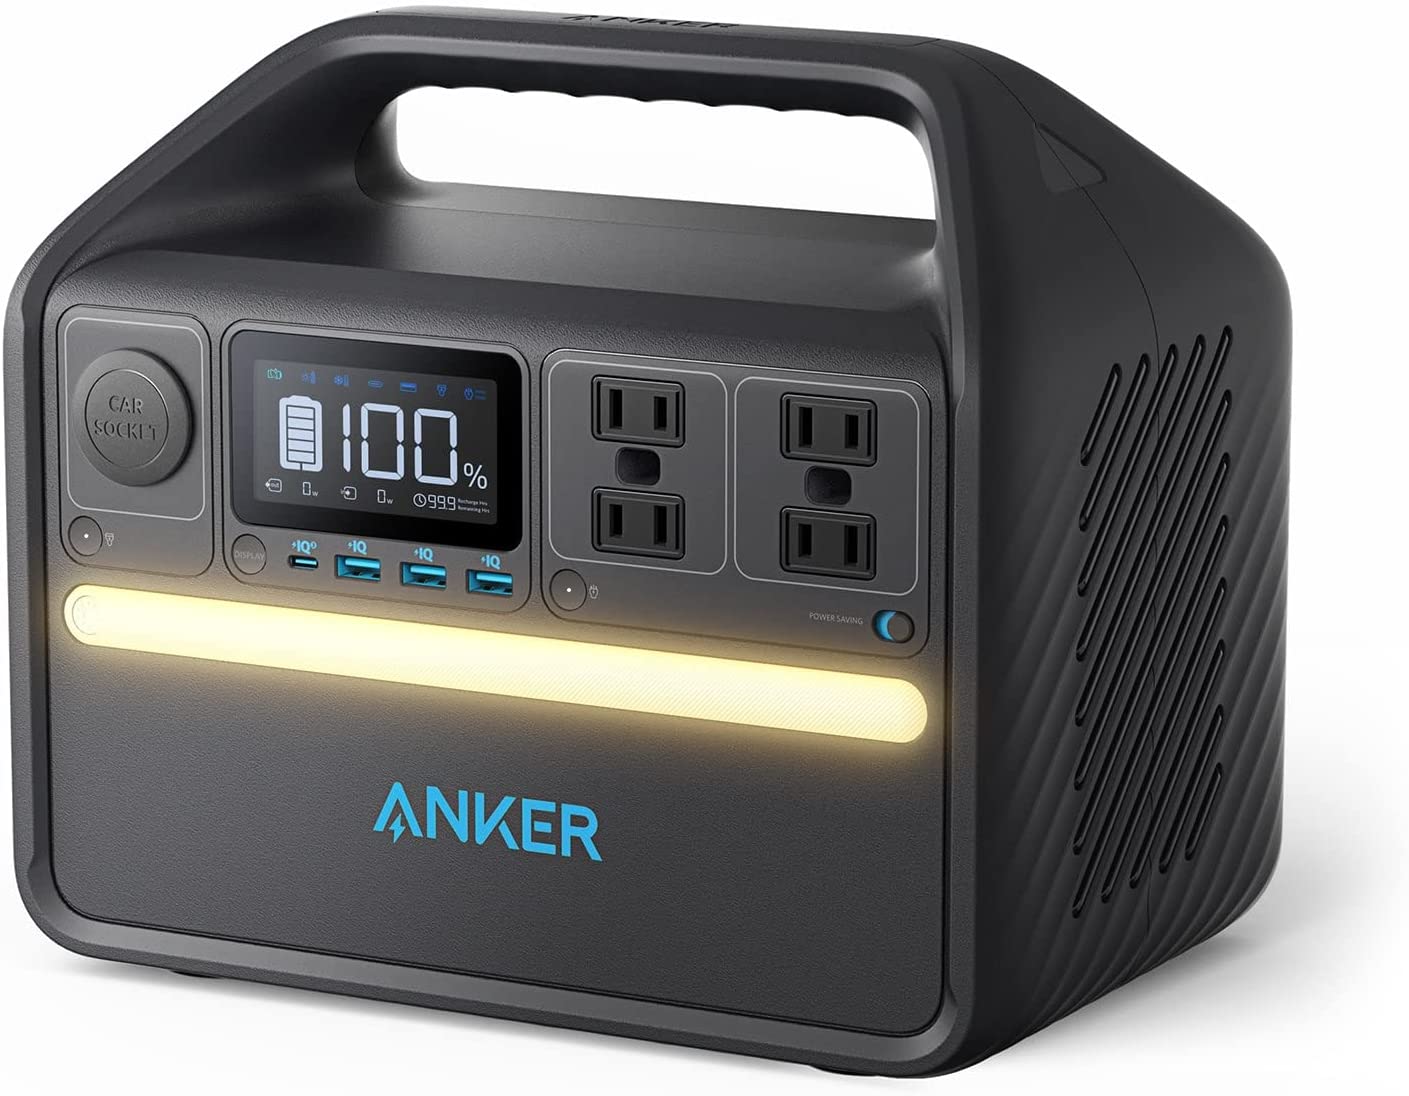 SAVE 25% OFF on Anker Portable Power Station 512Wh Portable Generator 500W $449.00 +FS